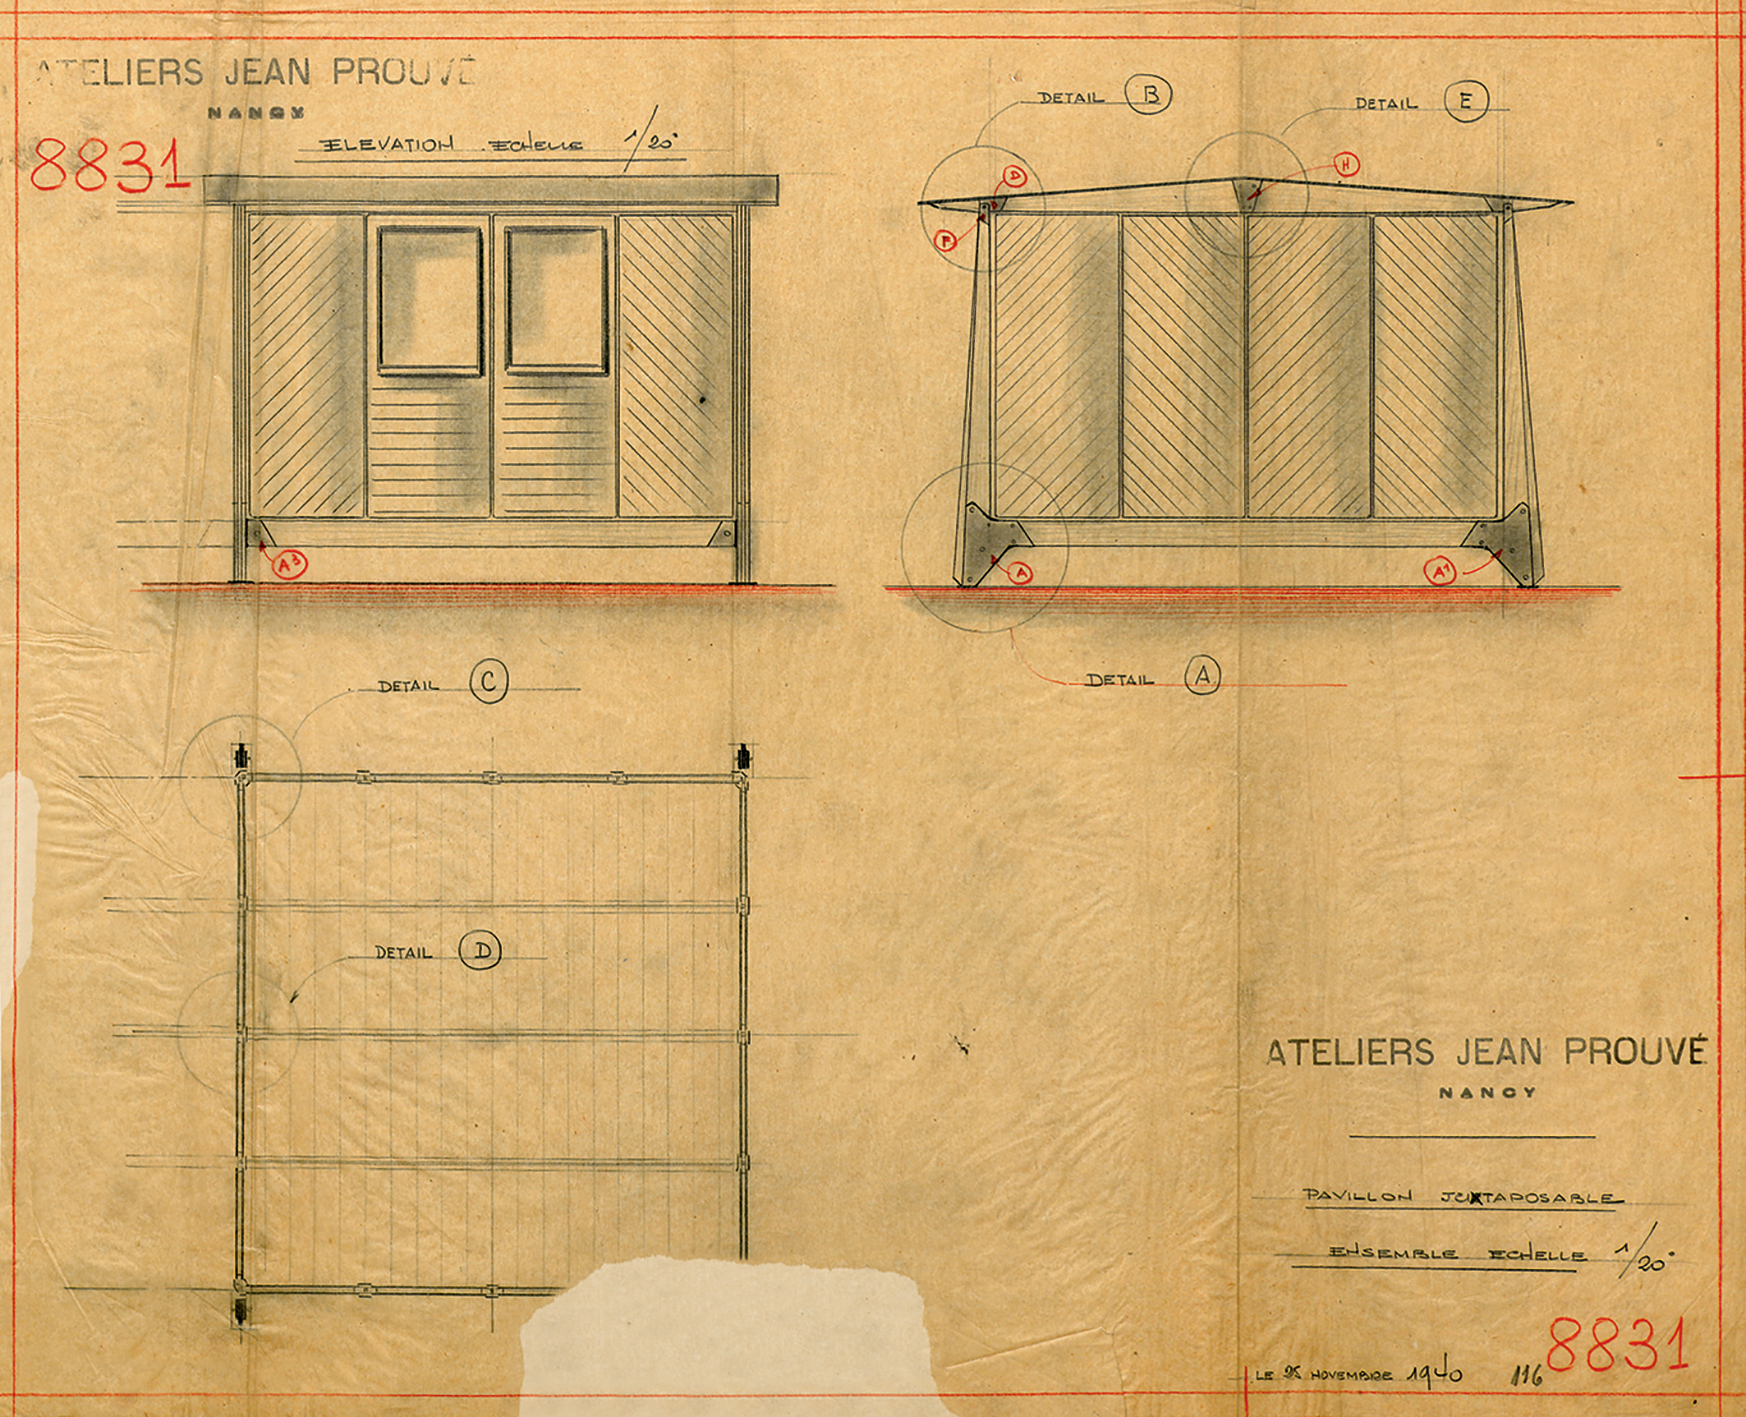 Ateliers Jean Prouvé “Extendable structure”: all-wood variant, with metal tubes. Plan no. 8831, 25 November 1940.